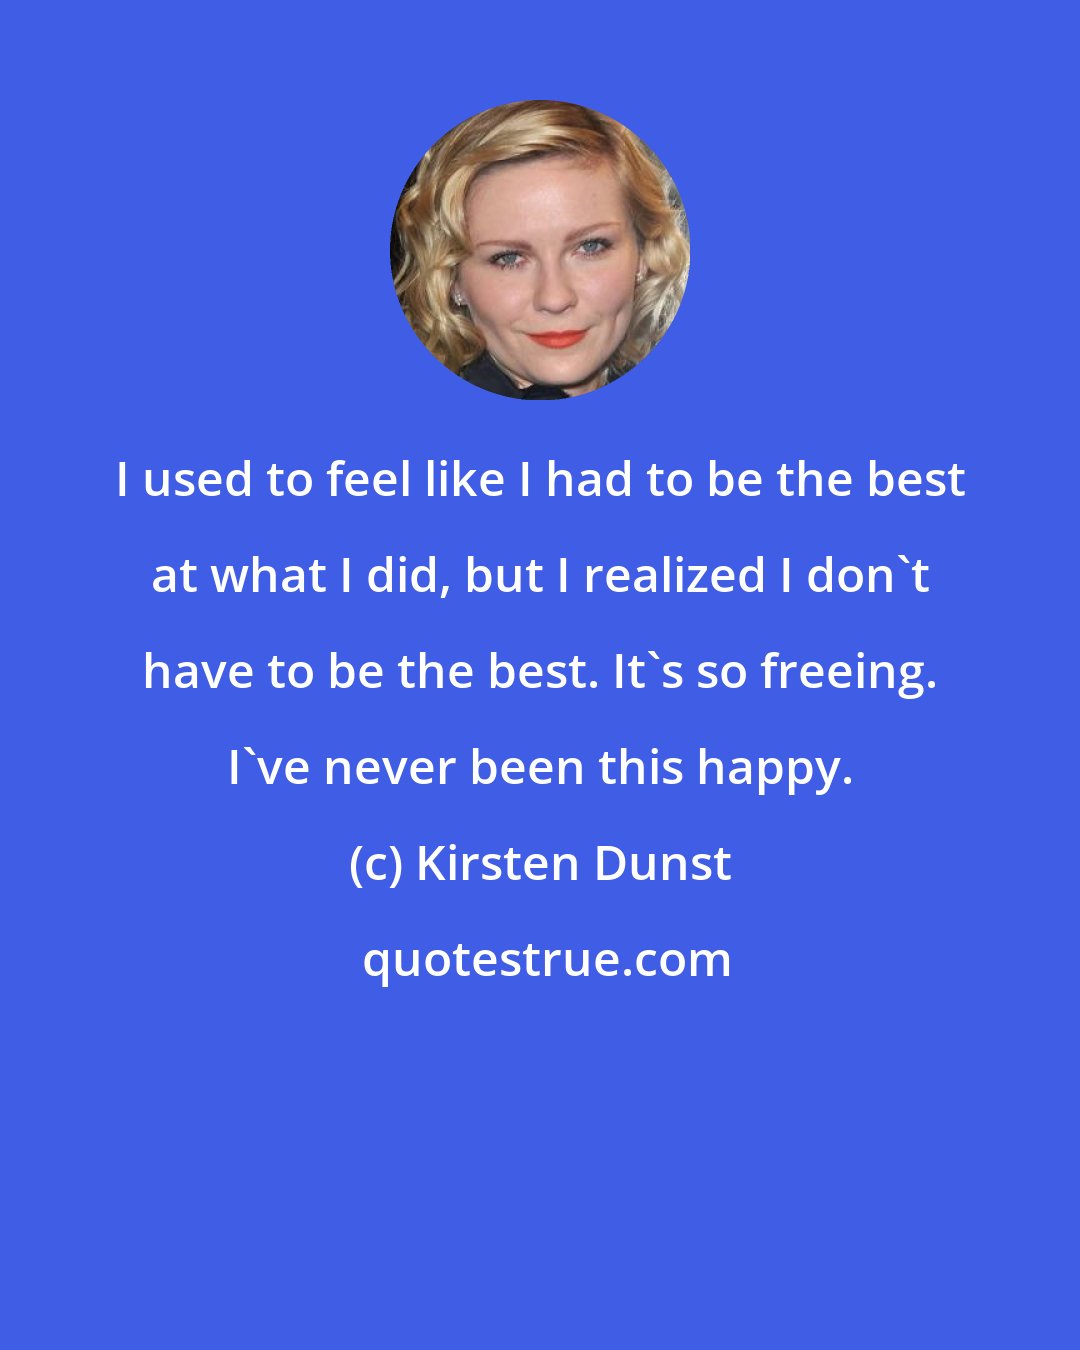 Kirsten Dunst: I used to feel like I had to be the best at what I did, but I realized I don't have to be the best. It's so freeing. I've never been this happy.